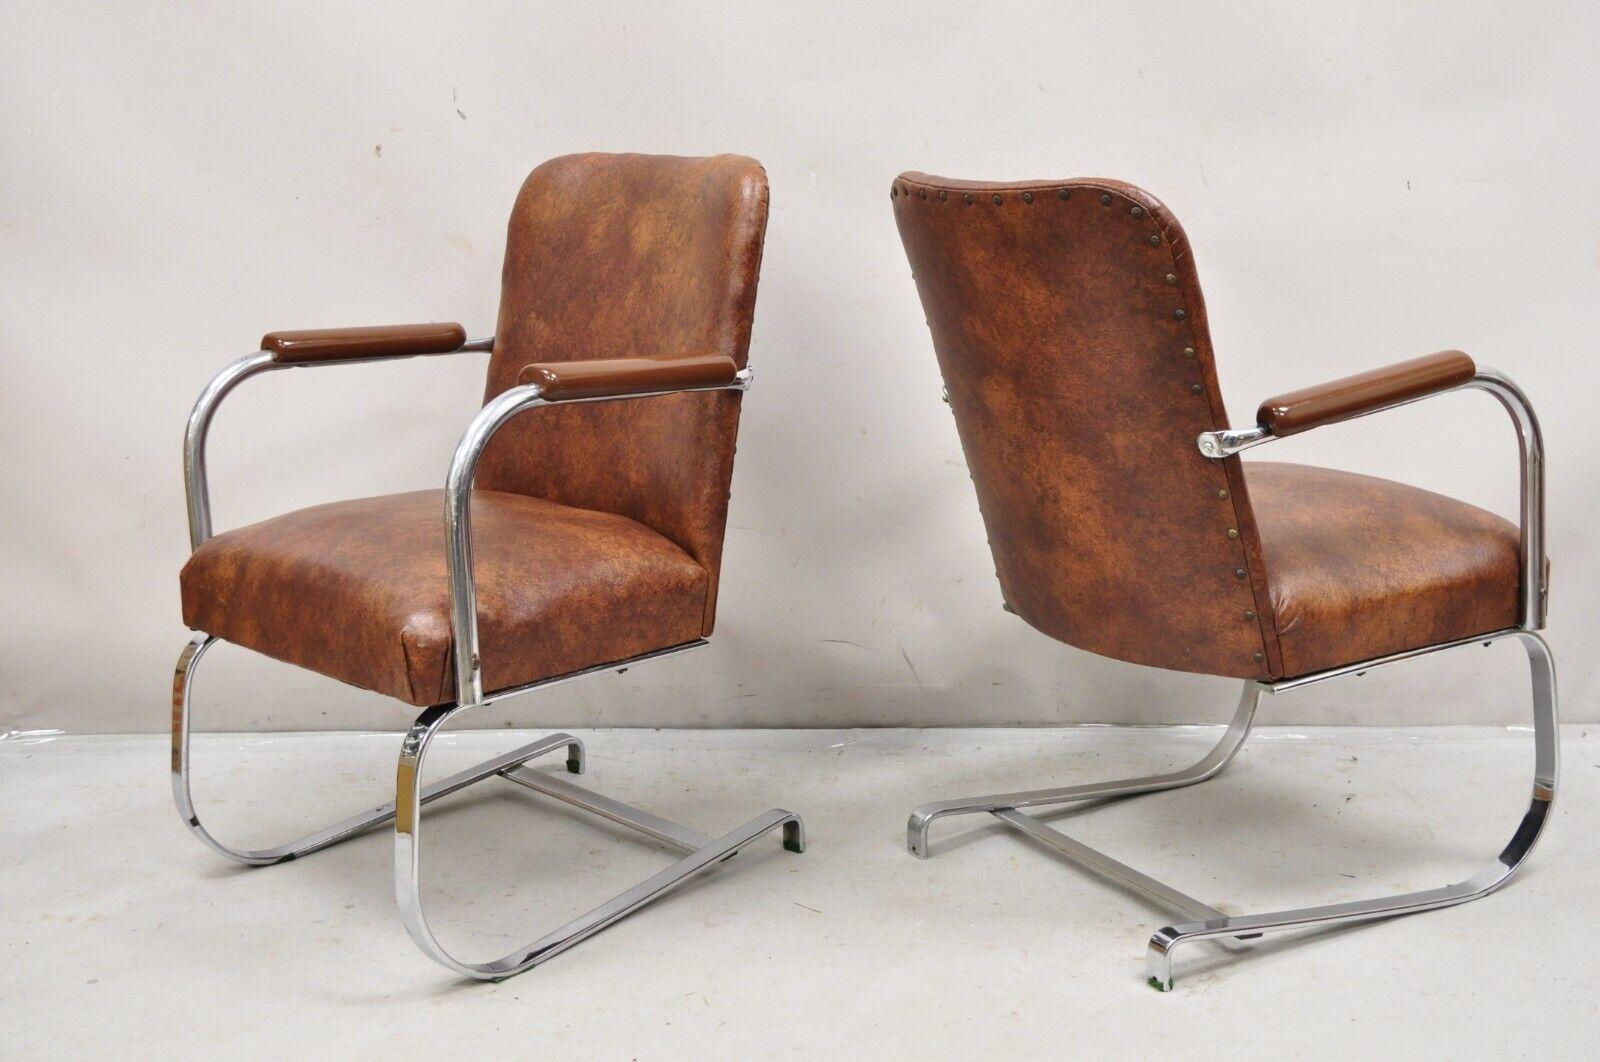 Vintage Lloyd Mfg Kem Weber Art Deco Steel Cantilever Lounge Chairs - a Pair. Item features a steel flat bar cantilever frames, brown naugahyde upholstery, original label, very nice antique/vintage chairs. Circa 1930s. Measurements: 33